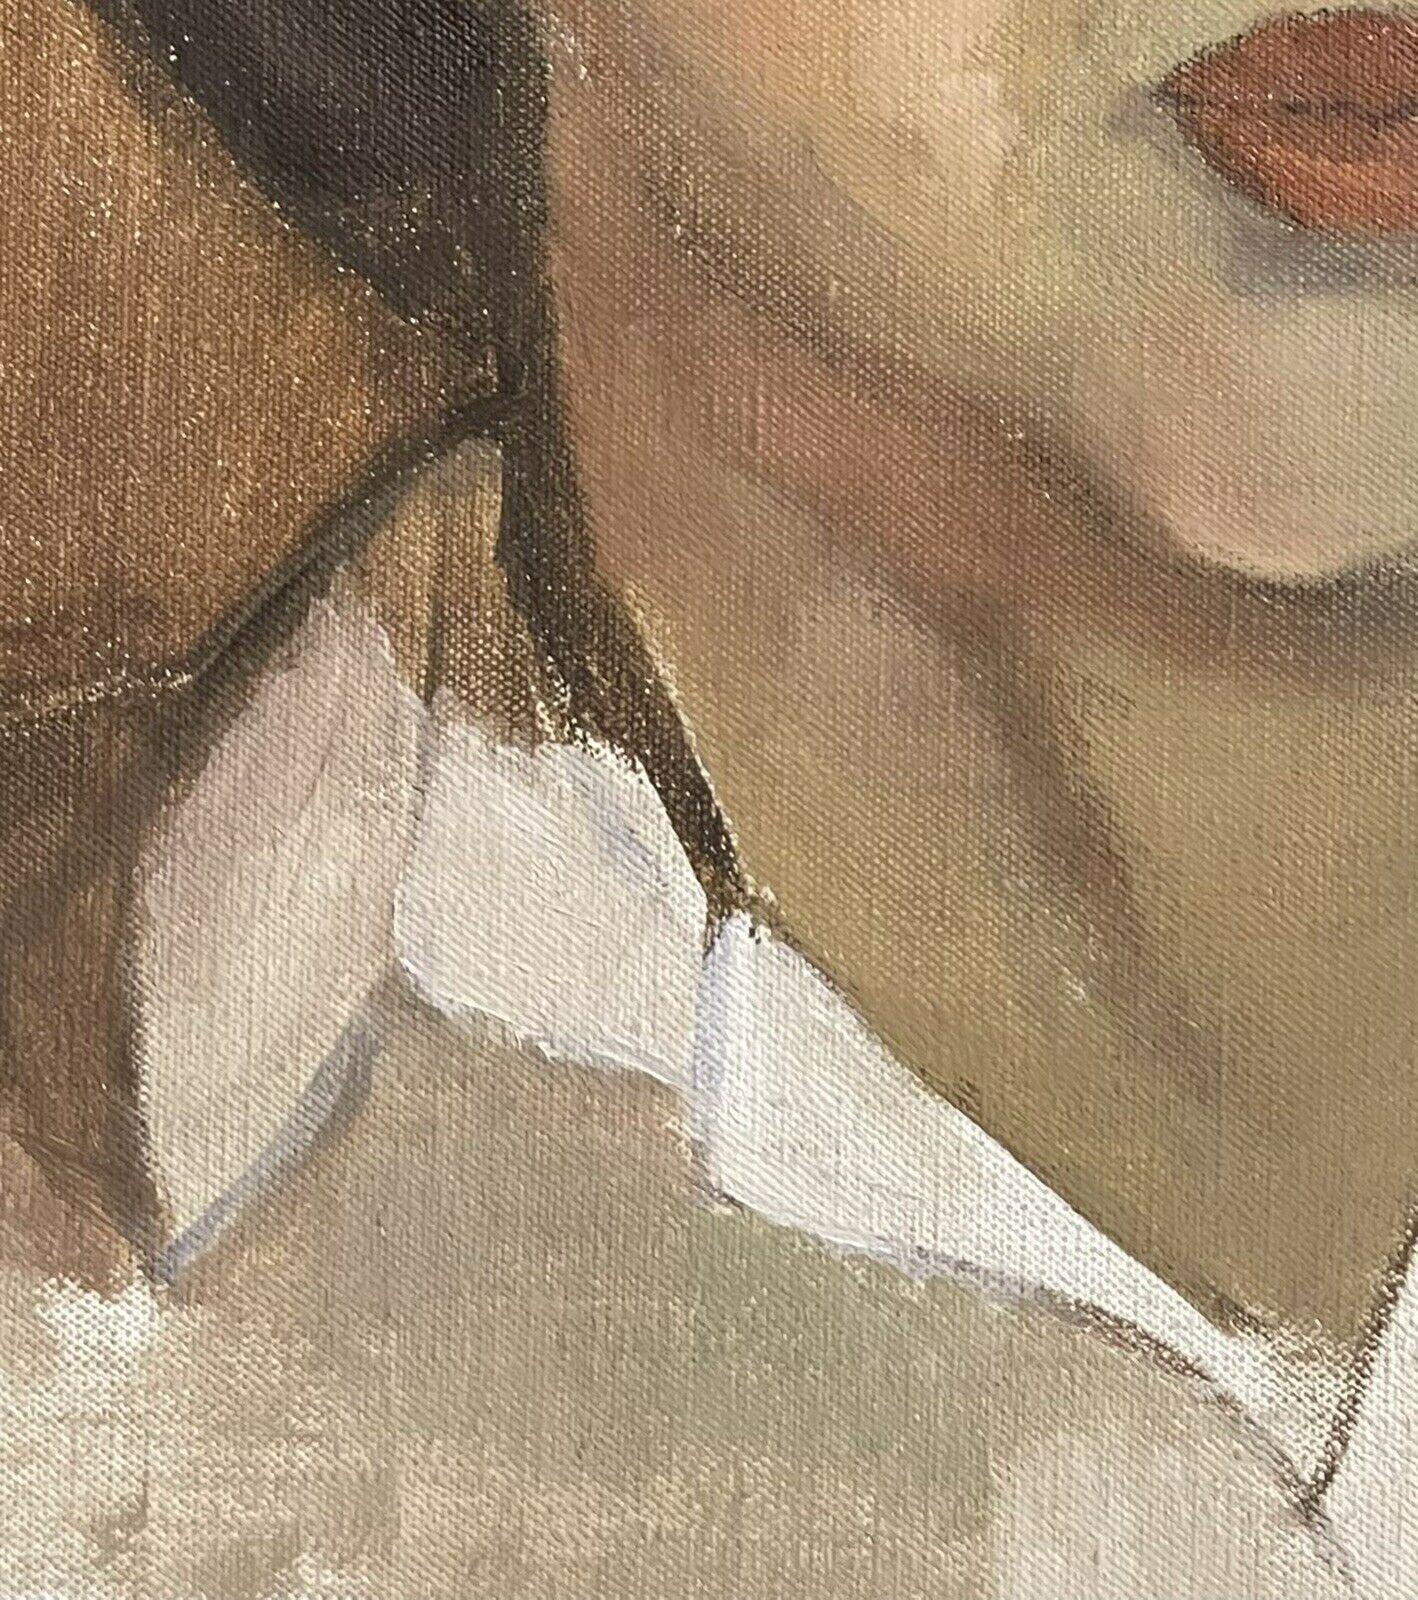 MID 20TH CENTURY FRENCH PORTRAIT SKETCH OF YOUNG WOMAN - OIL ON CANVAS For Sale 1